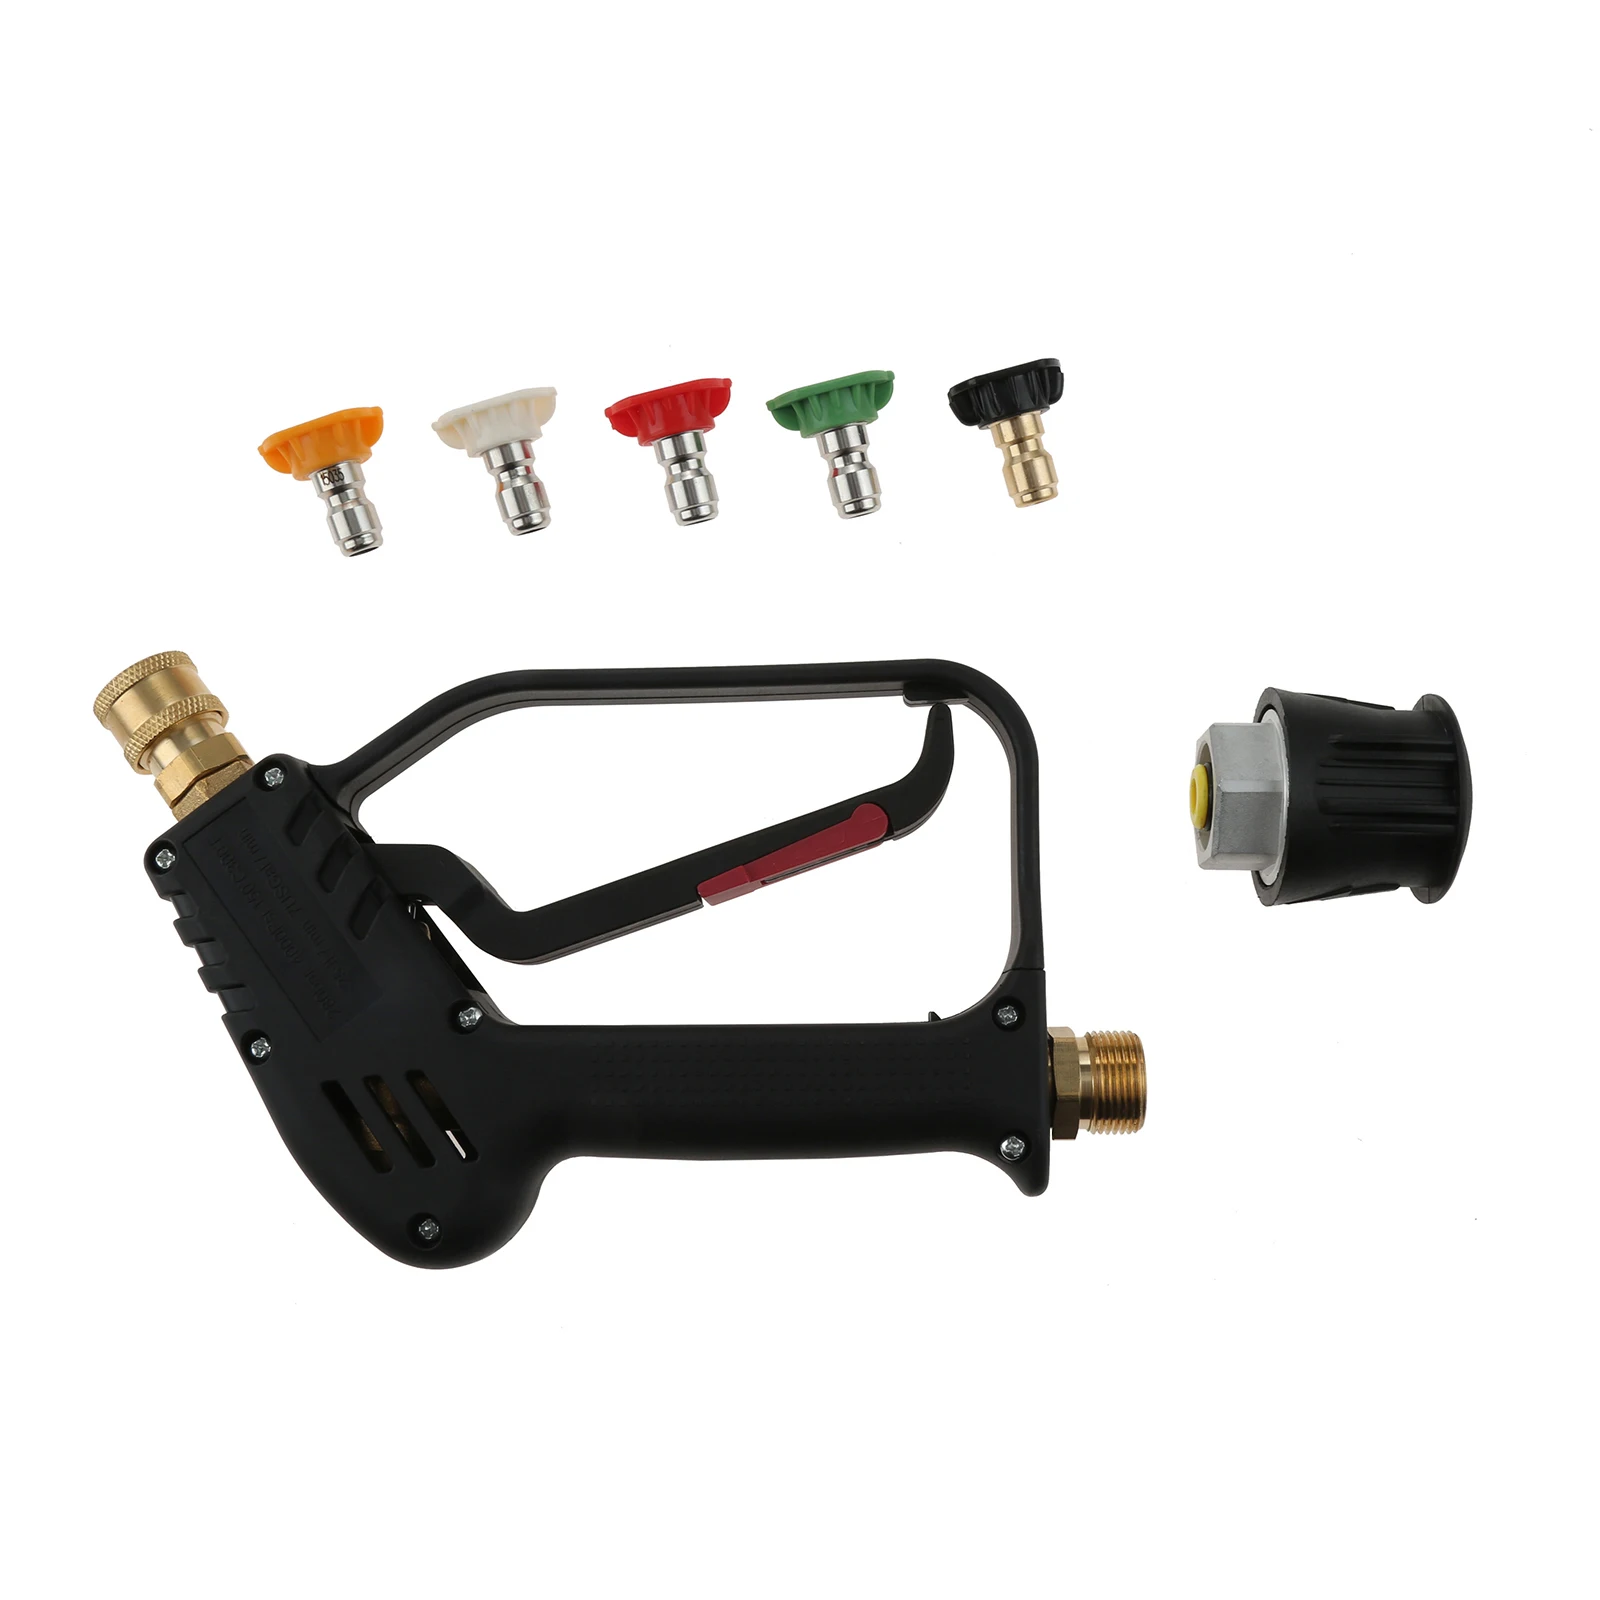 1pc 4000PSI Car Cleaning Tool With 5PCS Metal Nozzle Cleaning Water Gun High Pressure Washer Water